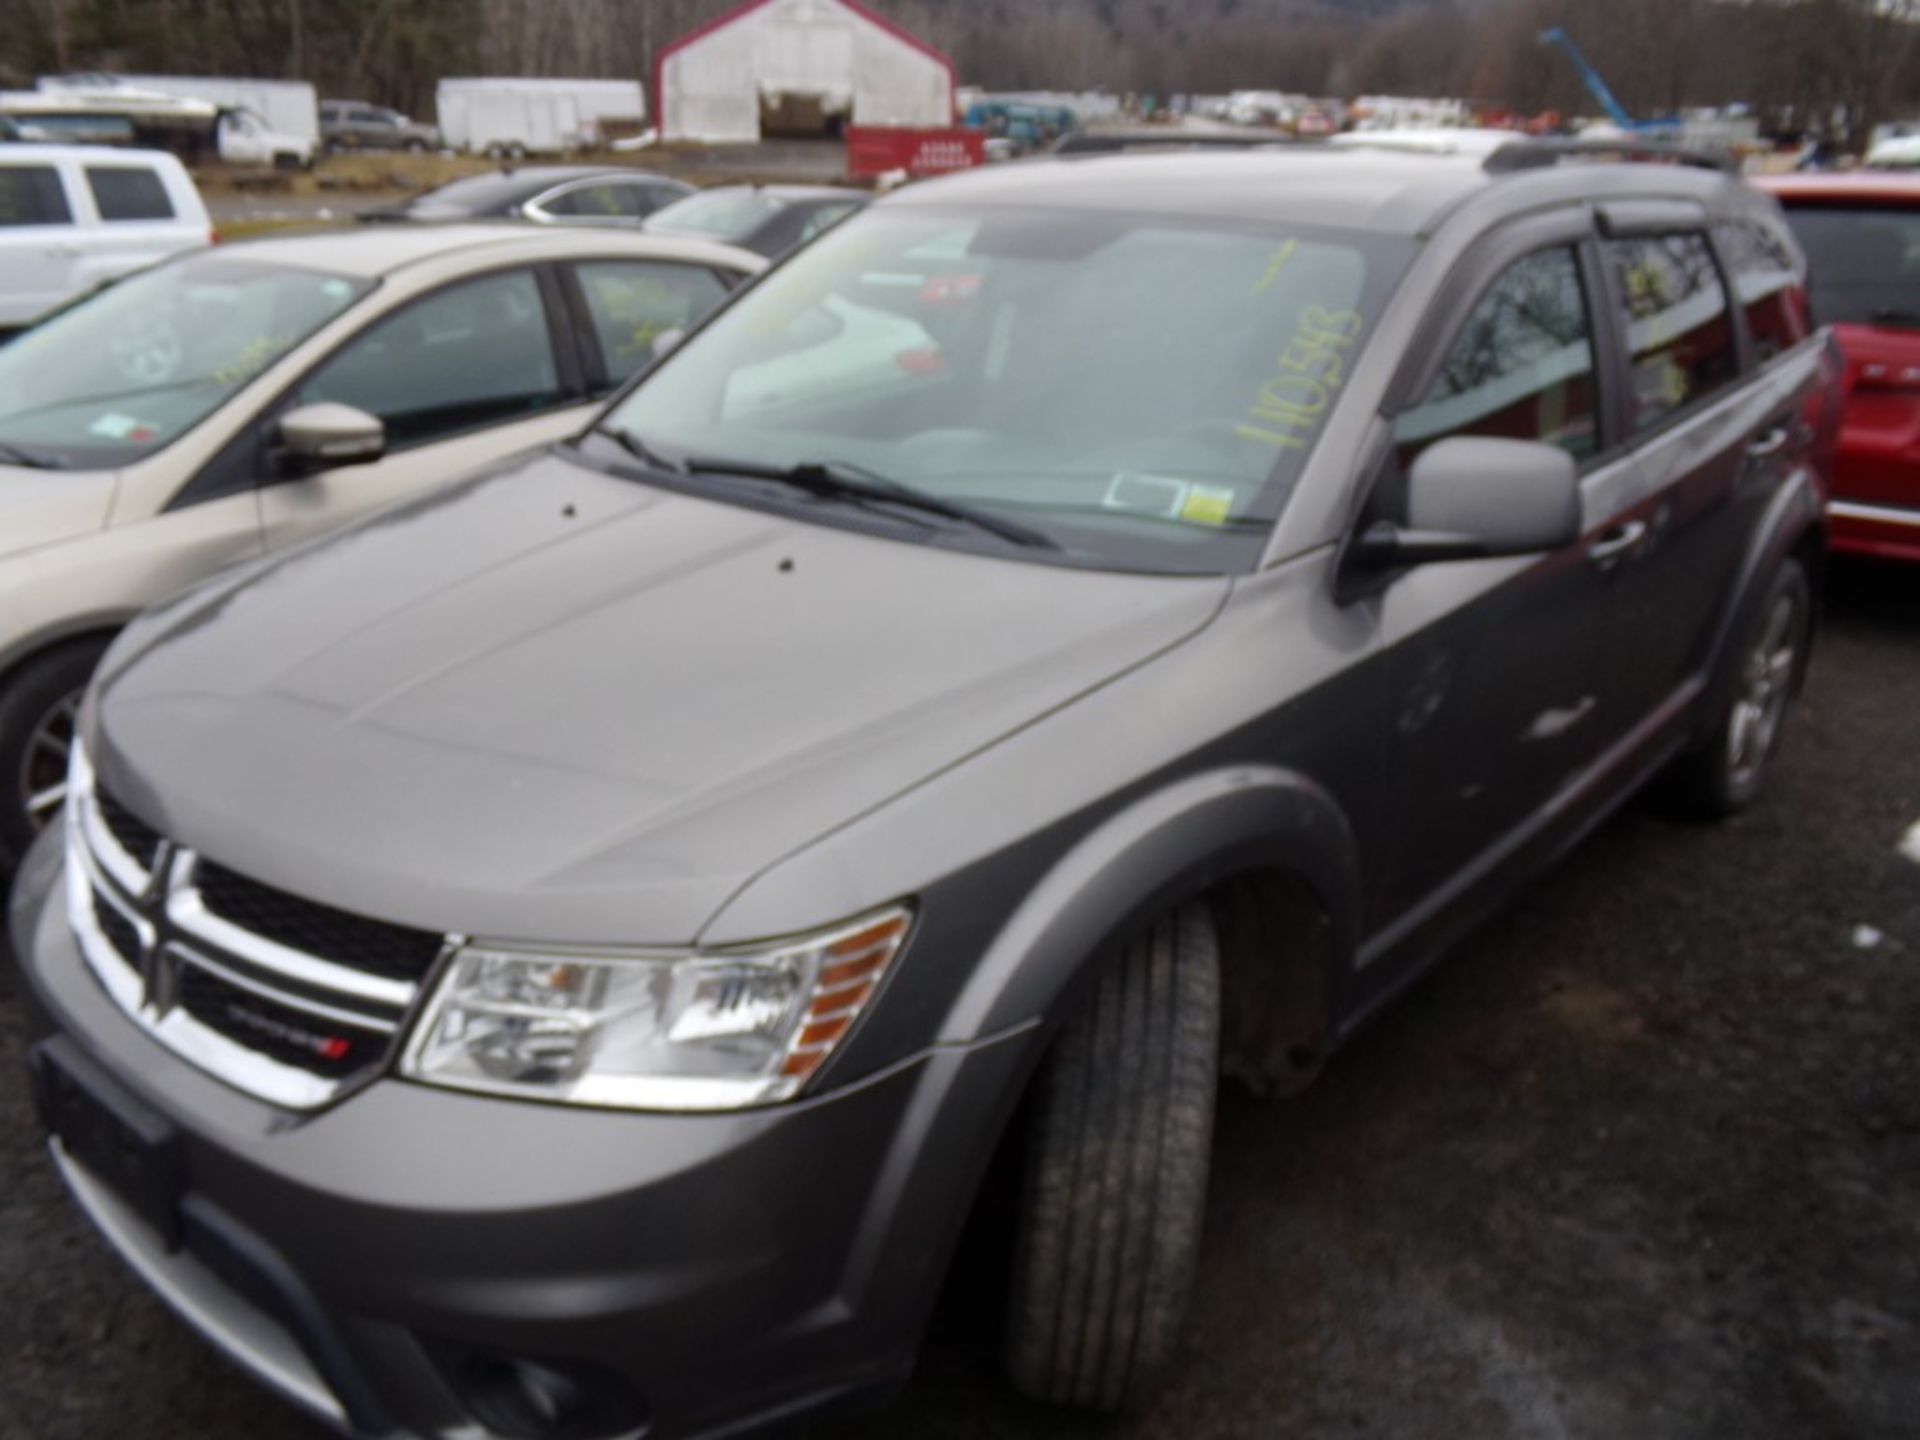 2012 Dodge Journey SXT, AWD, Grey, 3rd Row Seating, 110,543 Miles, VIN#: 3C4PDDBG9CT397588 - OPEN TO